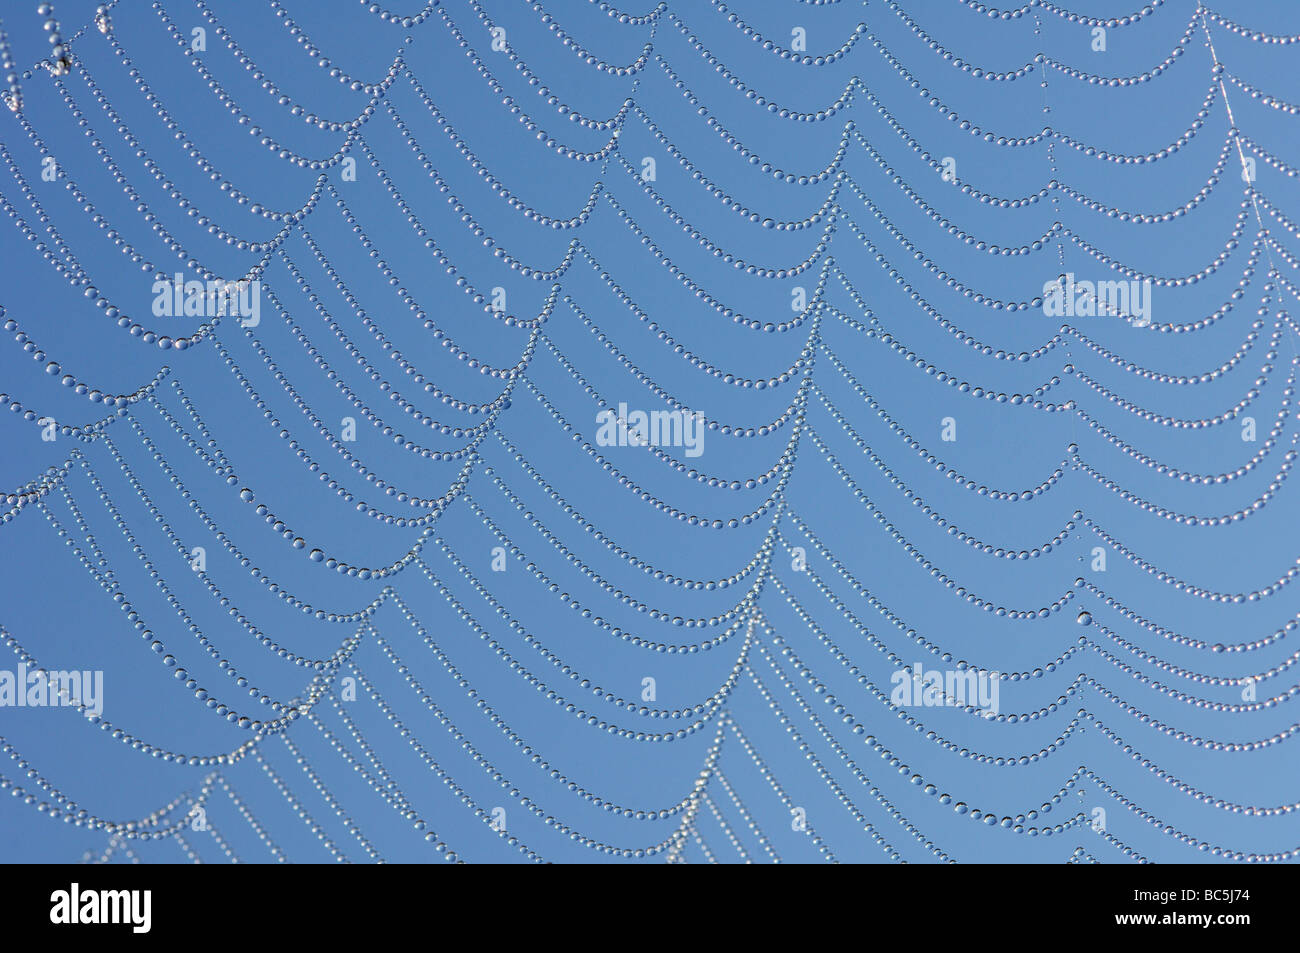 Spider web with dew drops against blue sky Stock Photo